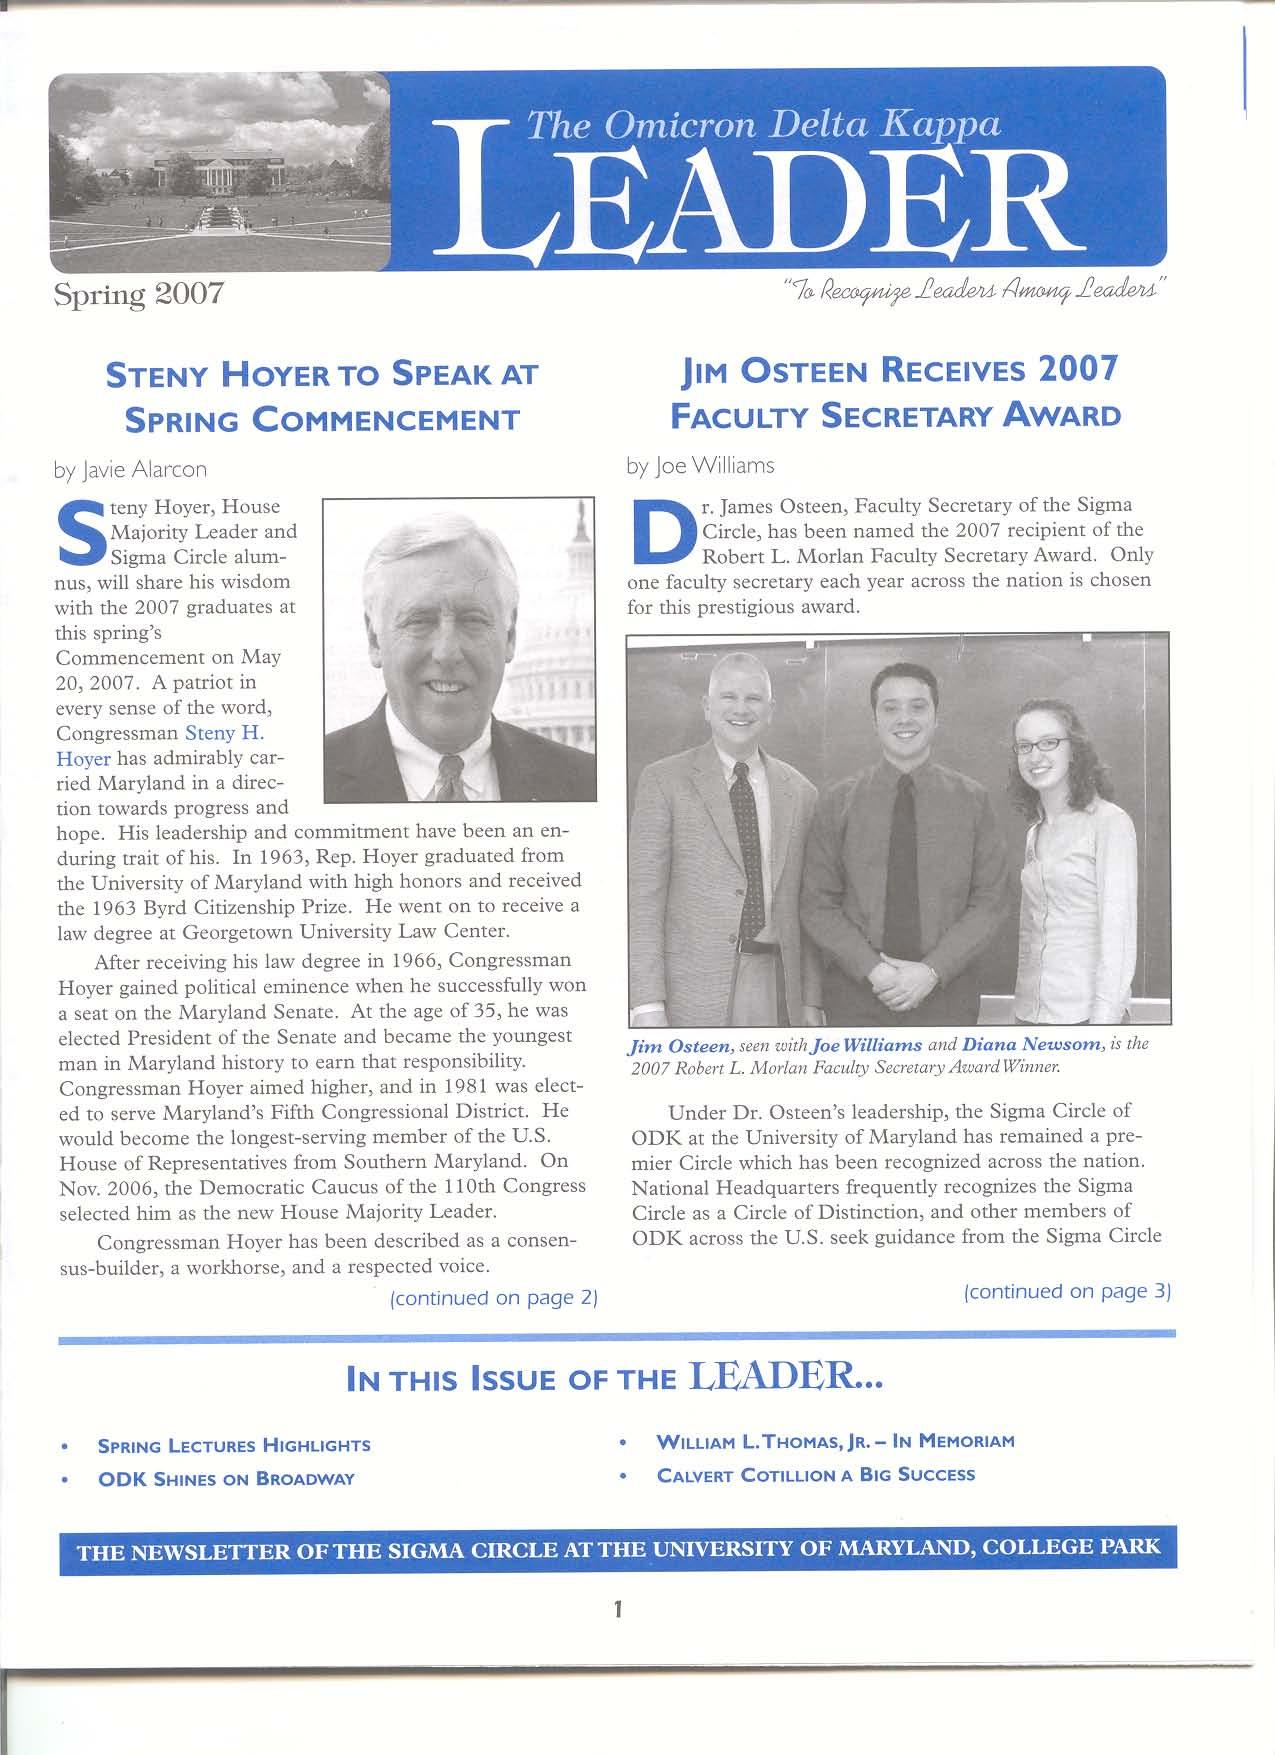 Front cover of Spring 2007 Newsletter